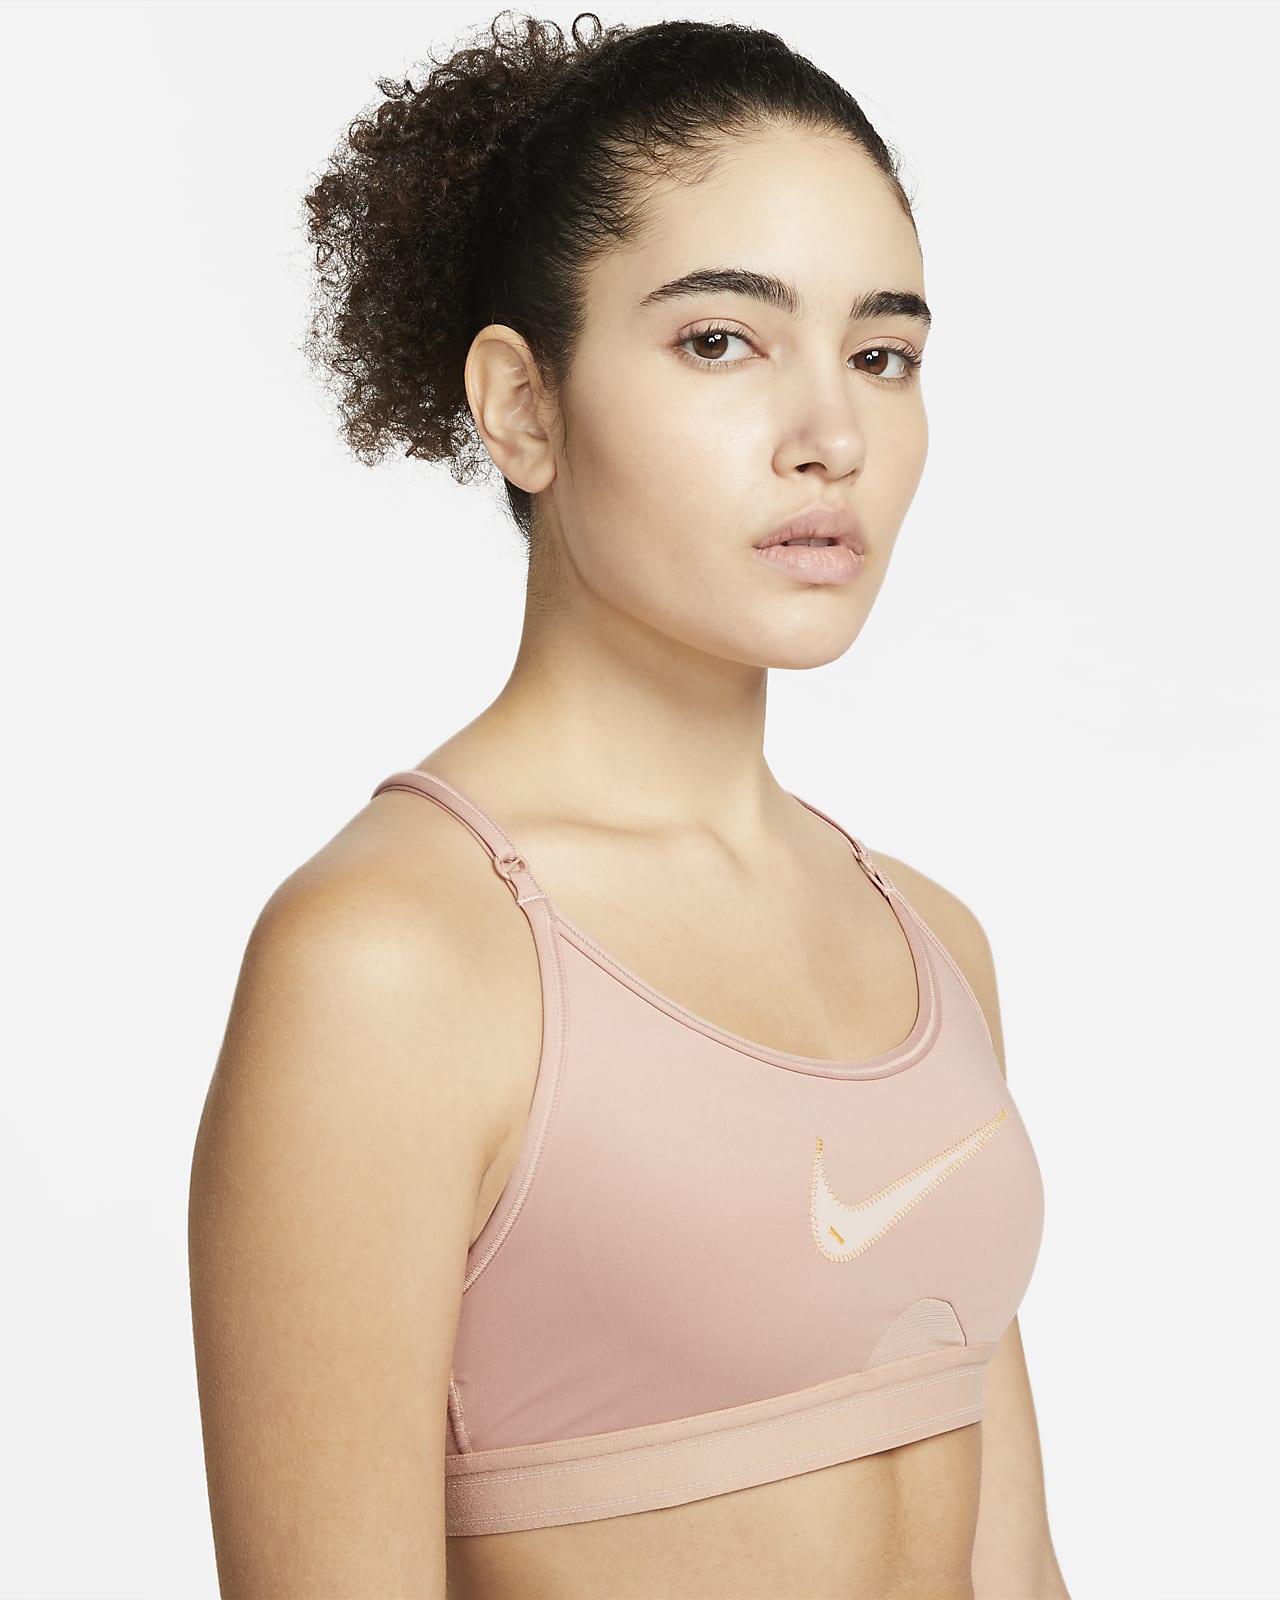 Nike Indy Air Pink Light Support Sports Bra Size M